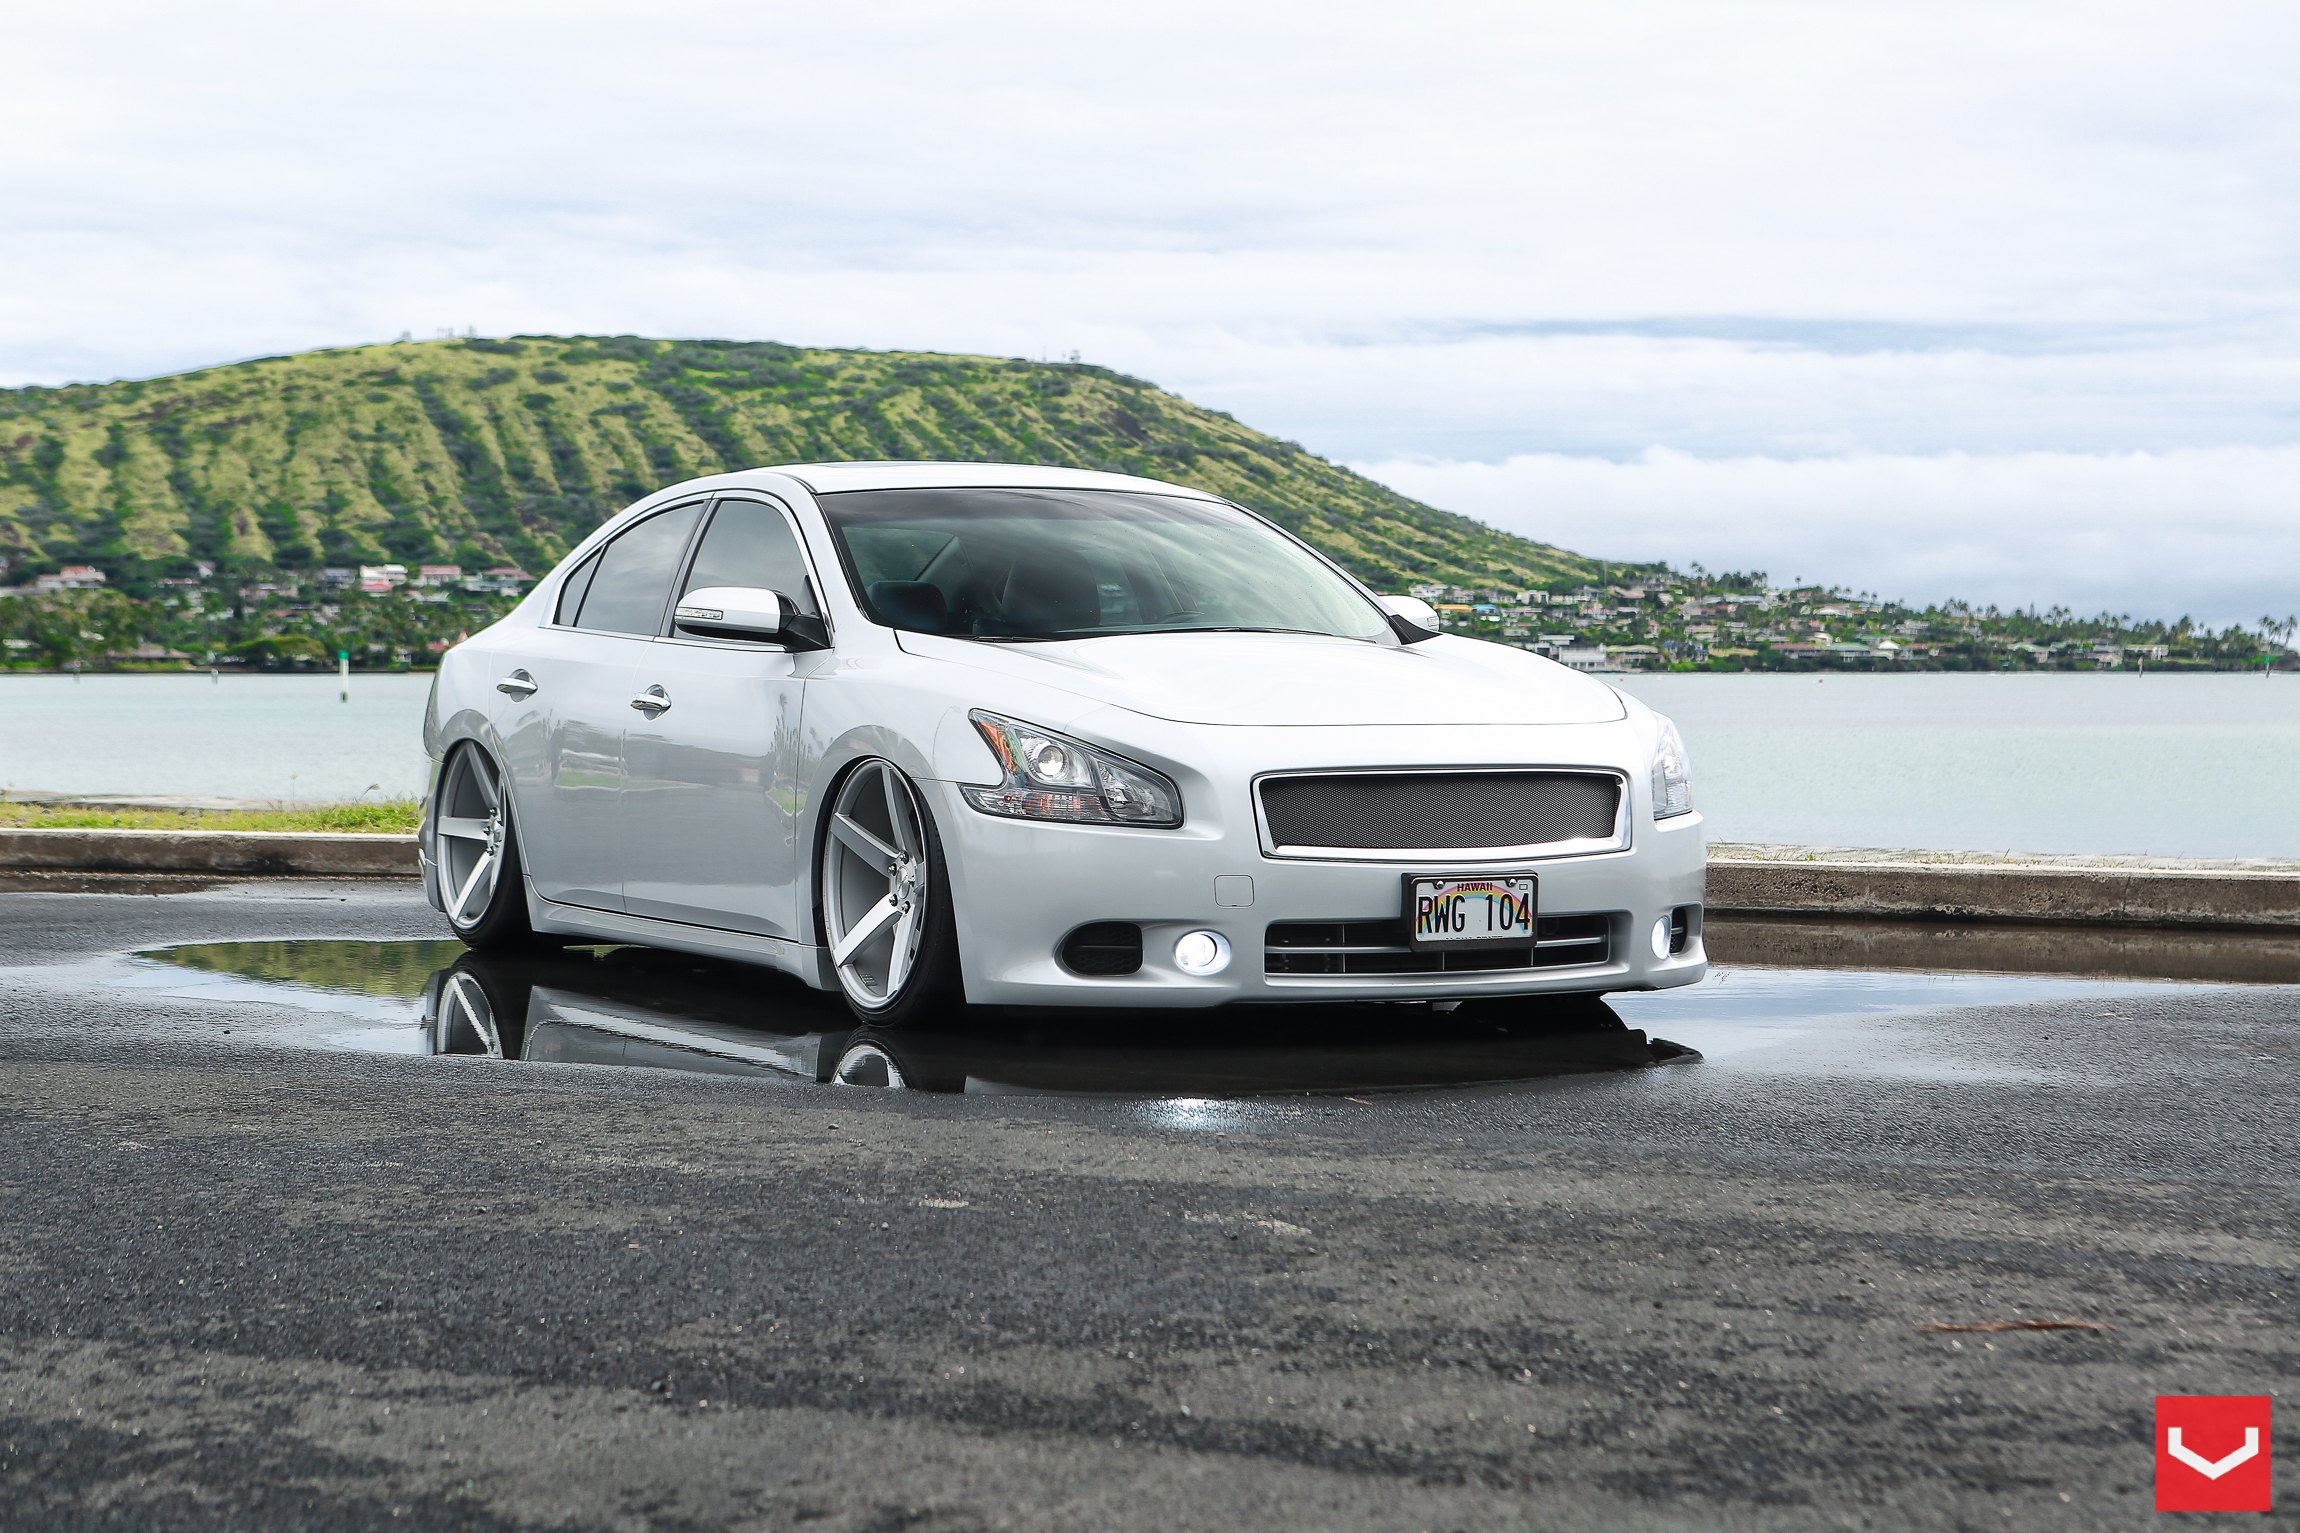 Front Bumper Cover on Silver Nissan Maxima - Photo by Vossen